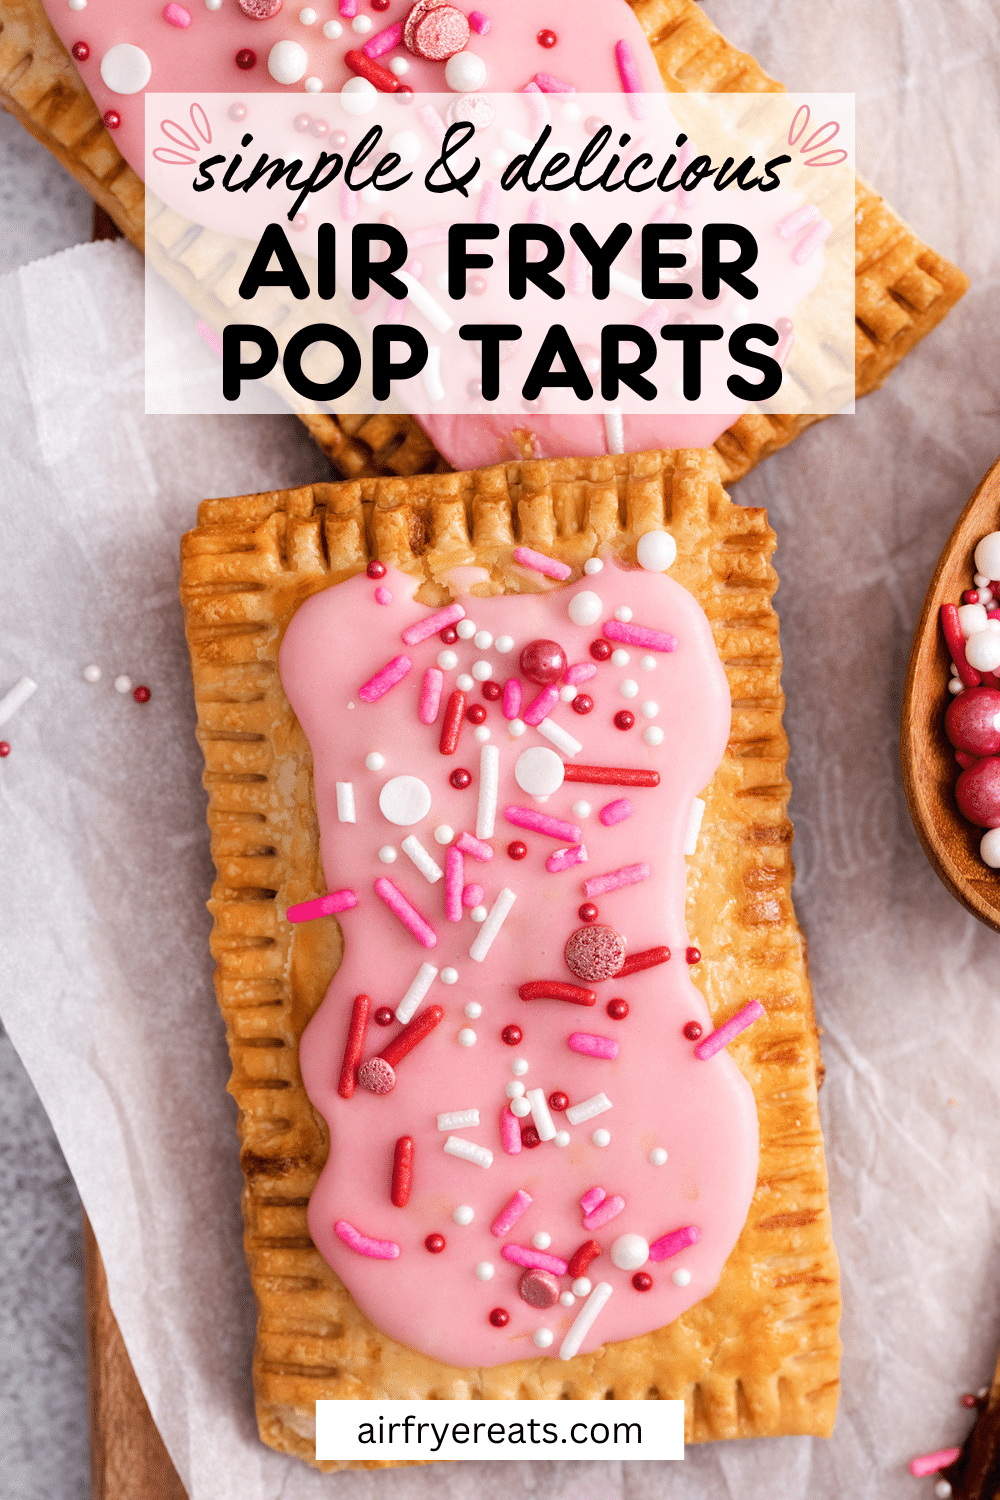 Making Pop Tarts in the Air Fryer, from scratch, is easier than you think! These rectangular fruit filled pastries are topped with pink frosting and sprinkles, just like you remember. But these Air Fryer Pop Tarts are better than the ones from the box, because you made them yourself! via @vegetarianmamma